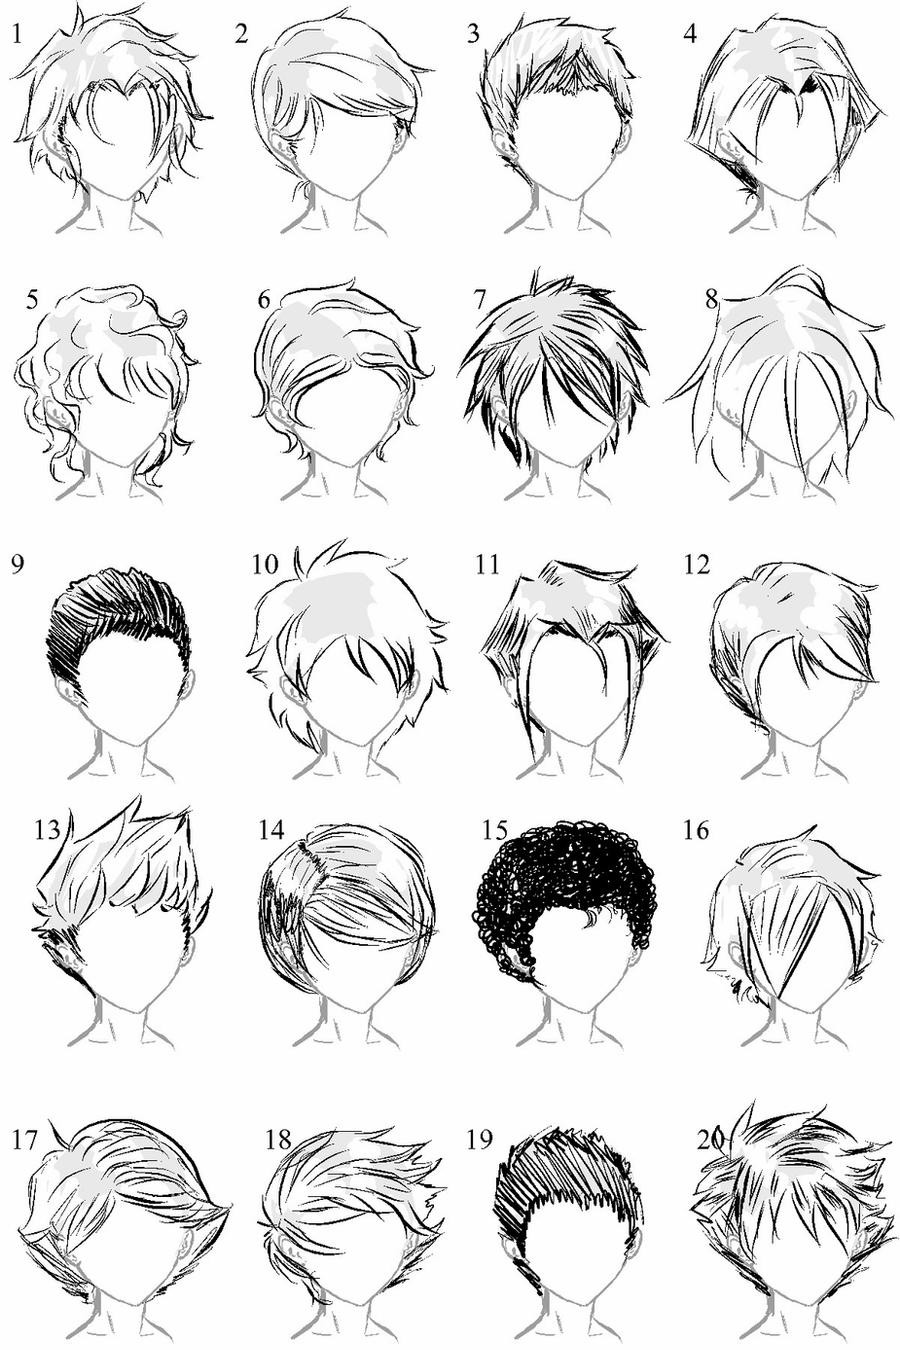 Boy Hairstyles Drawing
 20 More Male Hairstyles by LazyCatSleepsDaily on DeviantArt